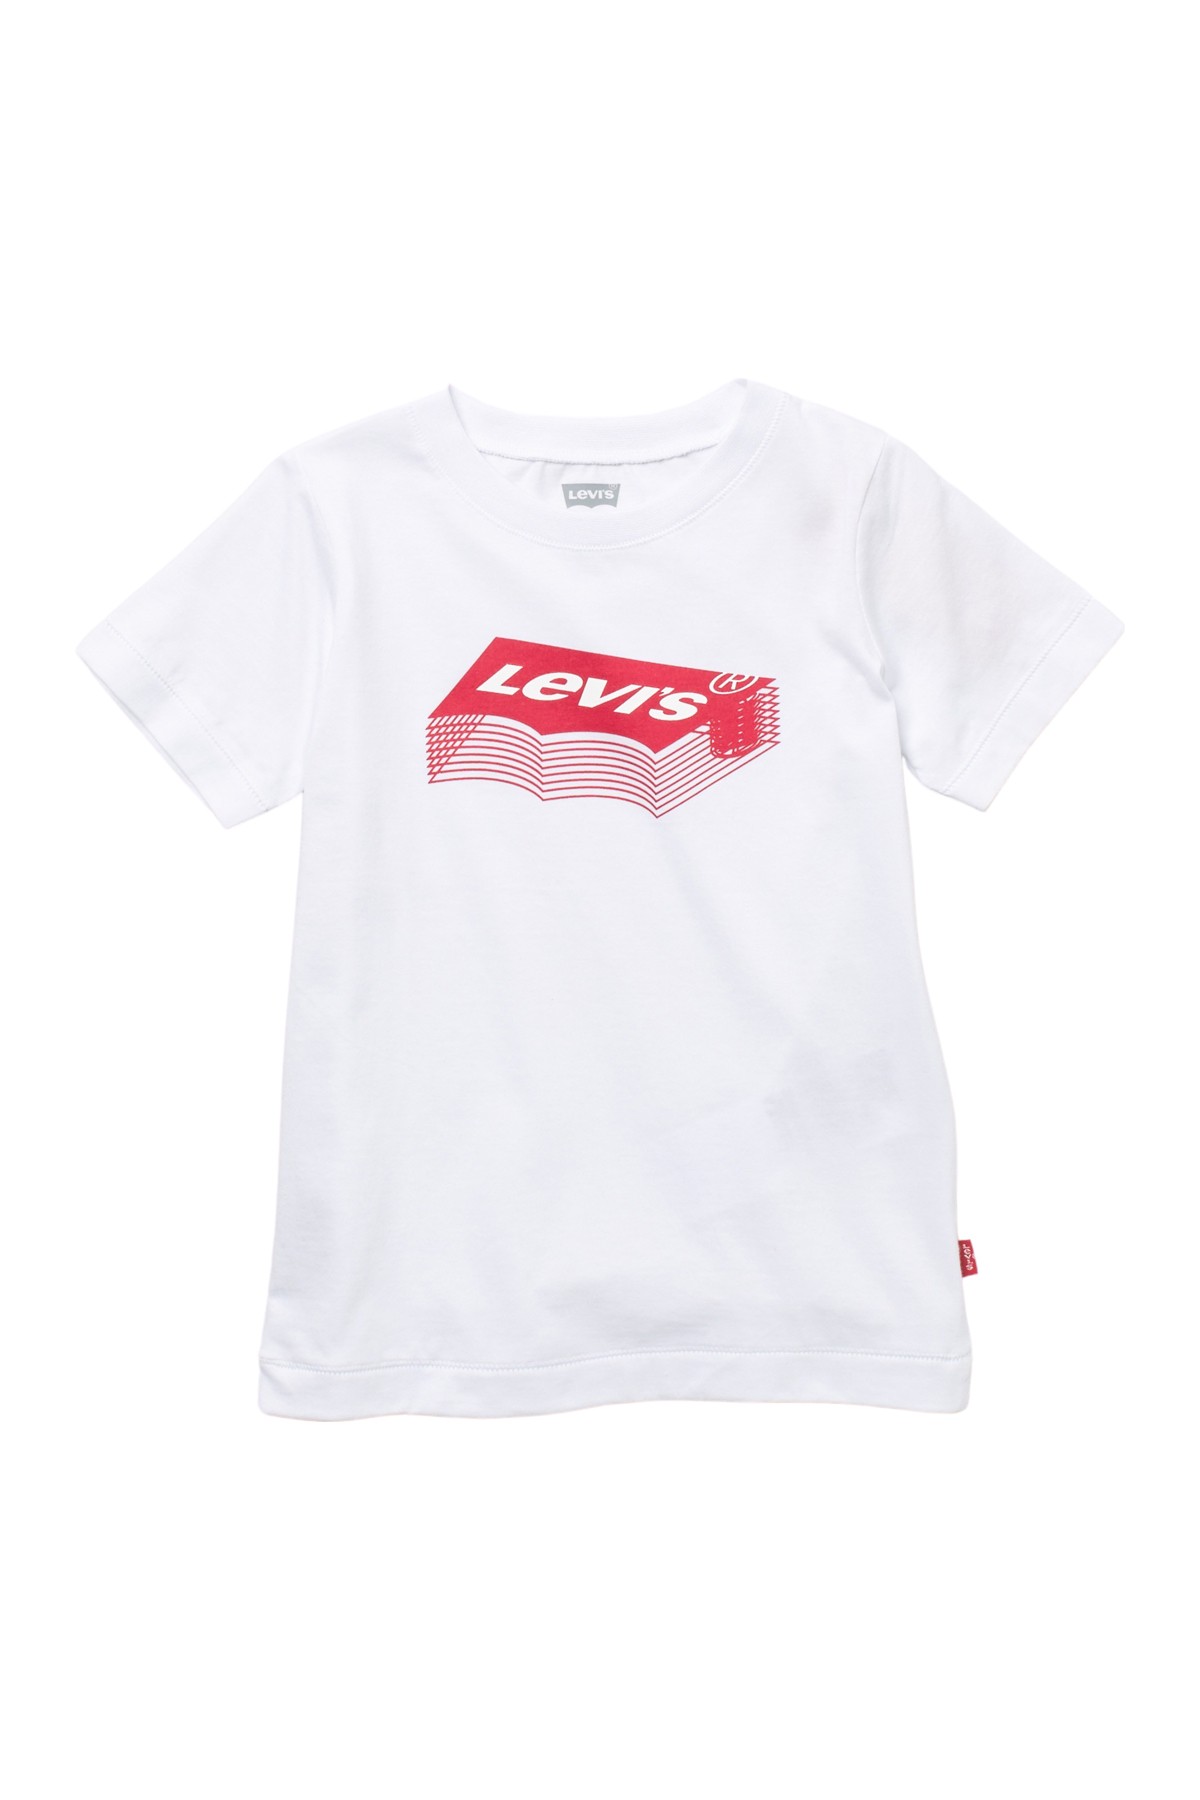 3D Stacked Batwing Logo T-Shirt (Toddler Boys) Levi's®